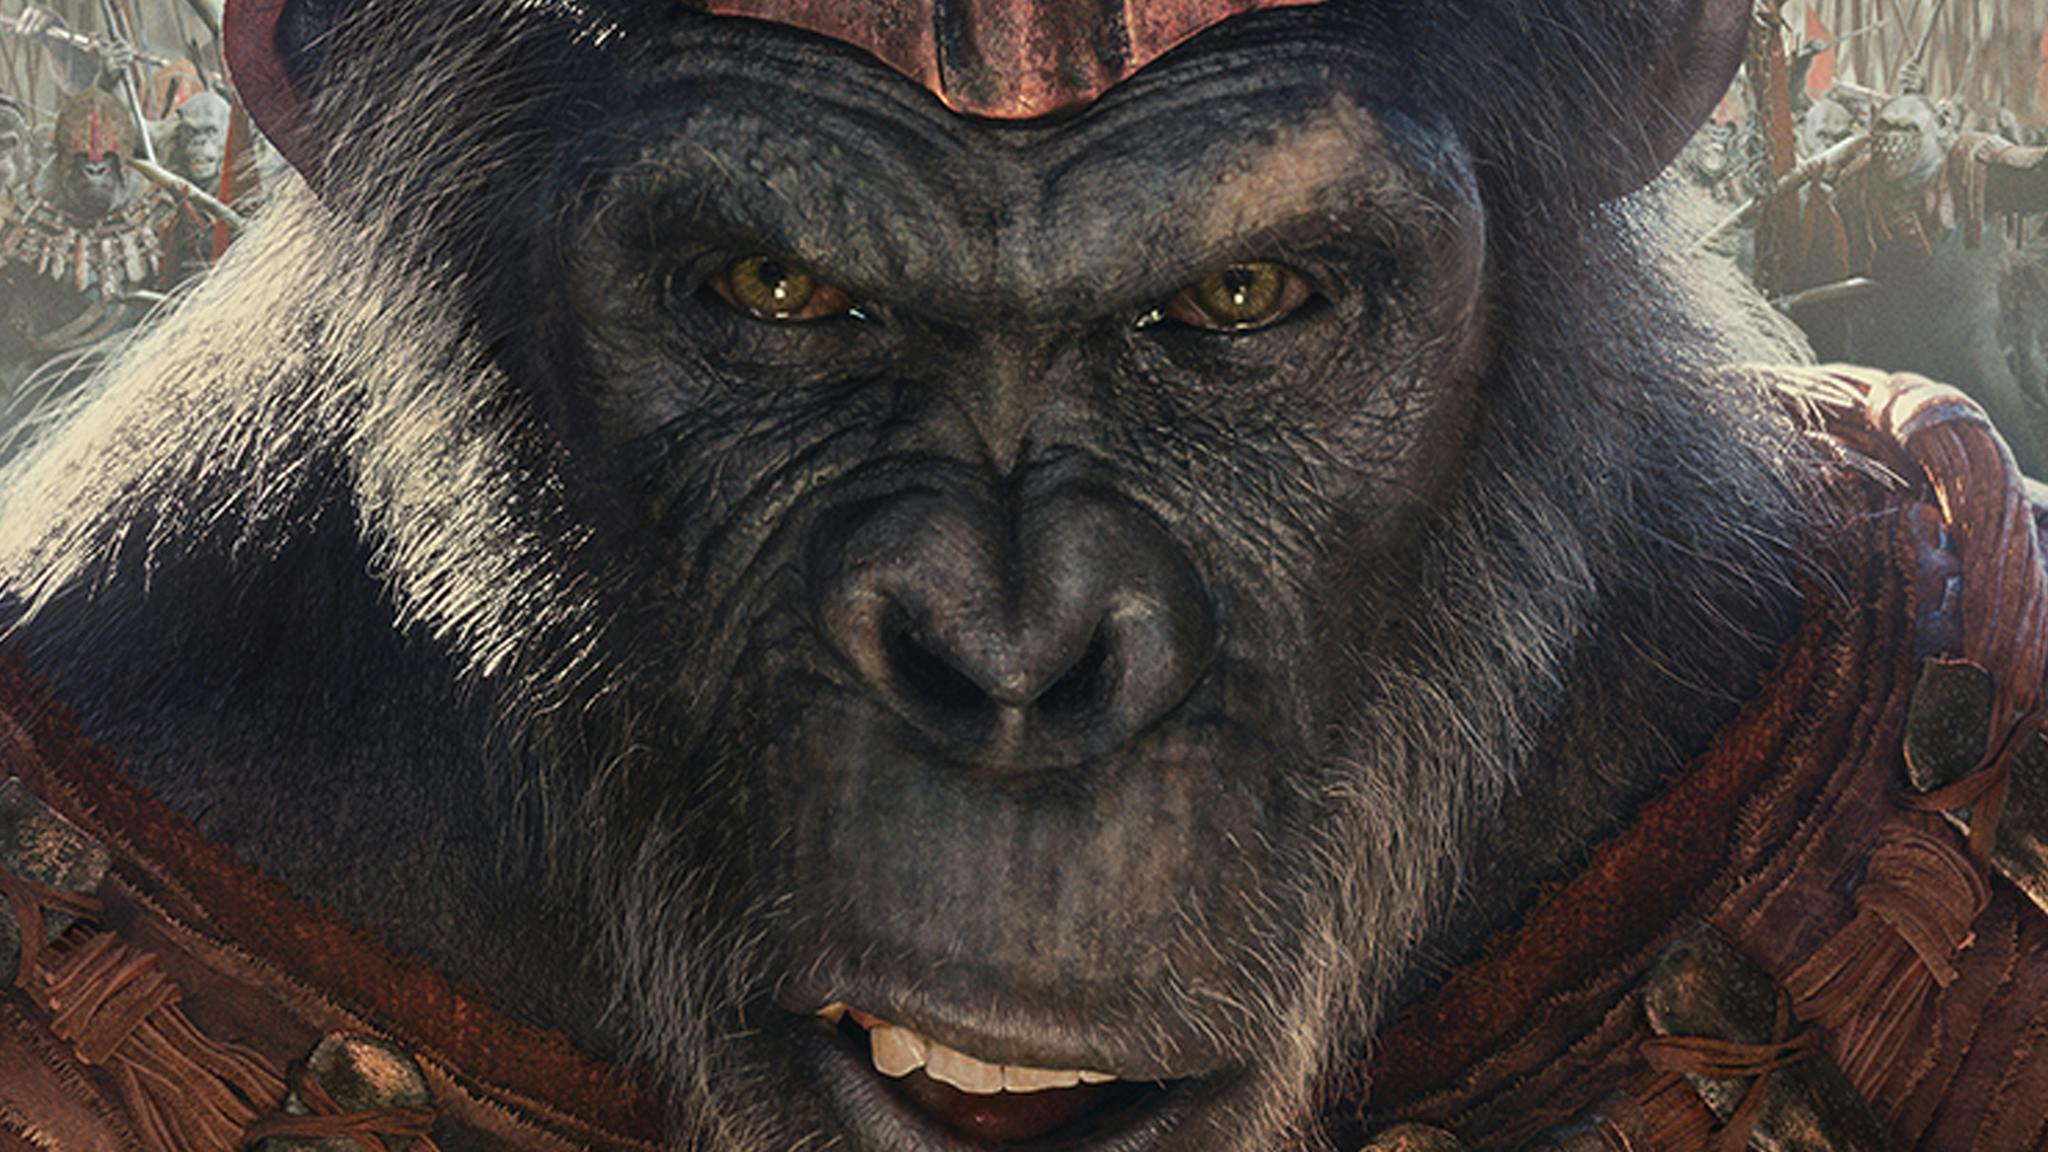 Watch the new trailer for Kingdom Of The Planet Of The Apes